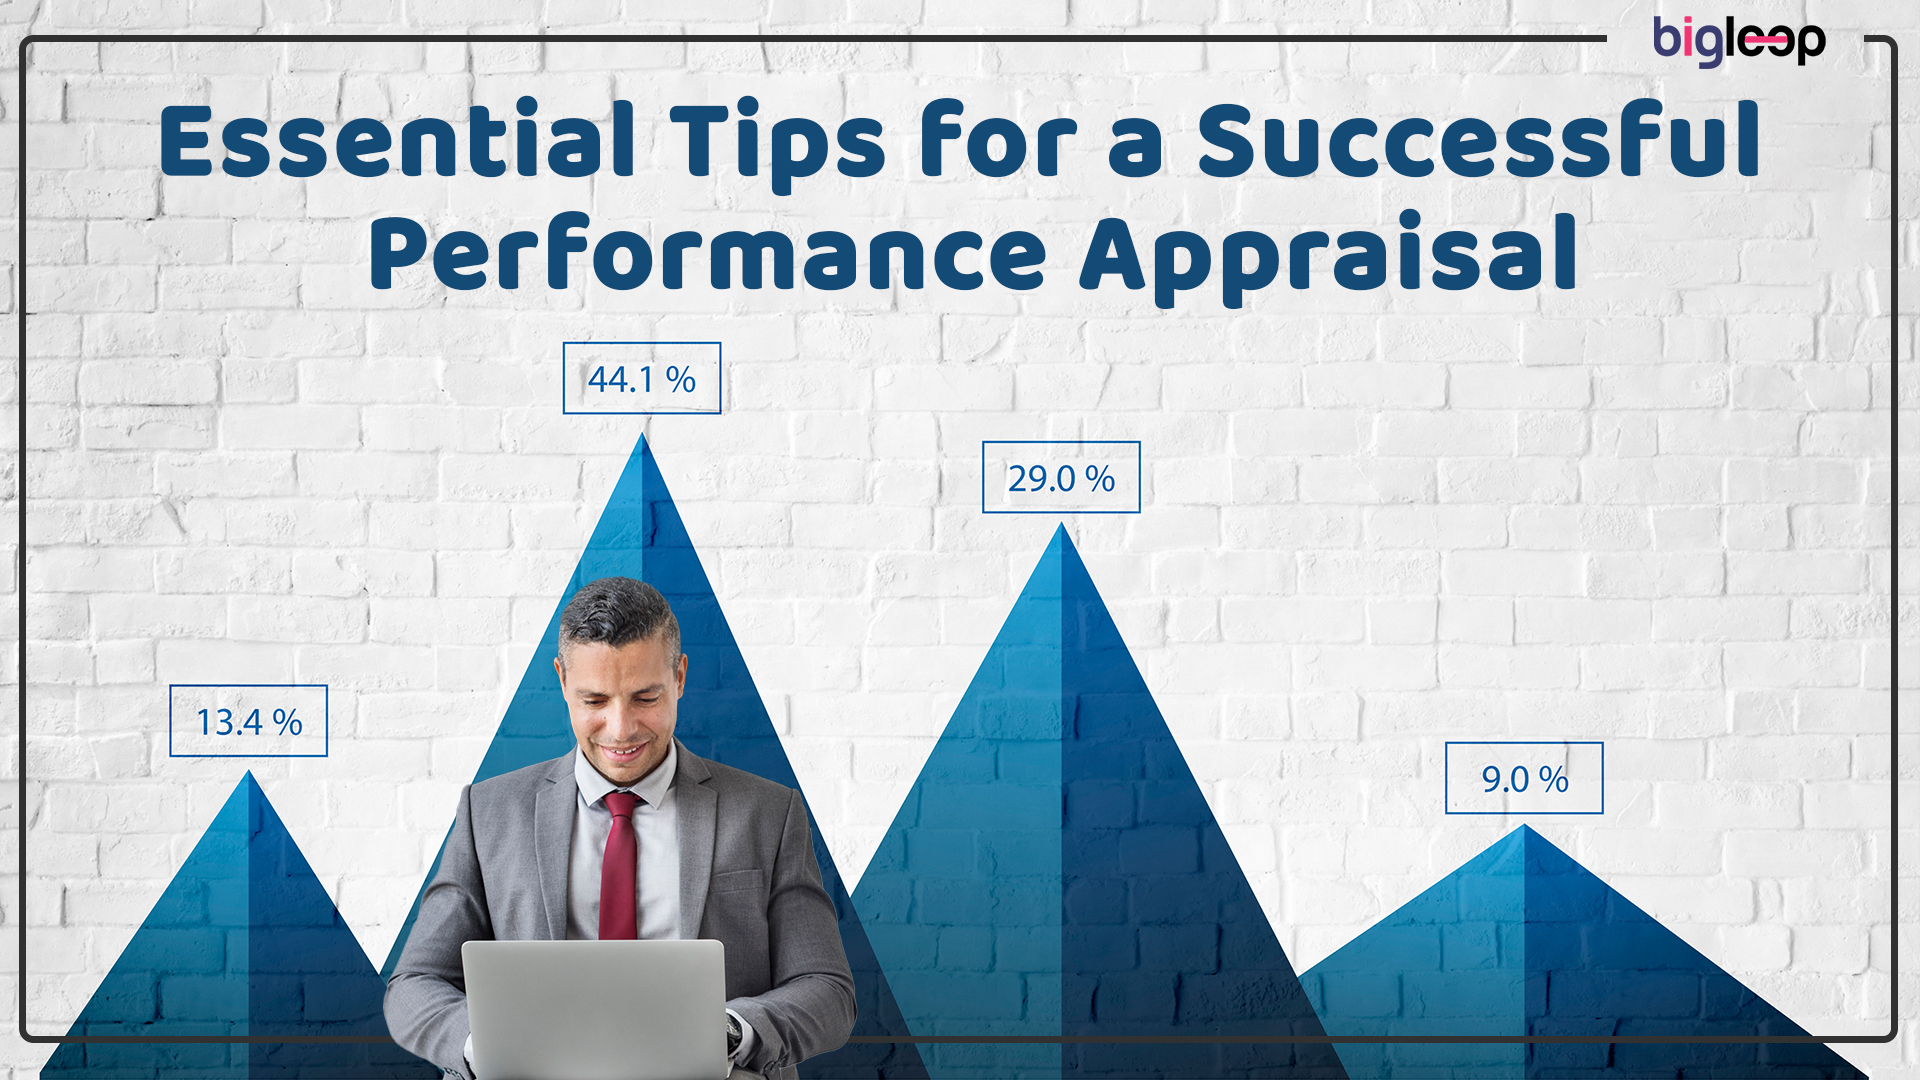 Essential Tips for a Successful Performance Appraisal